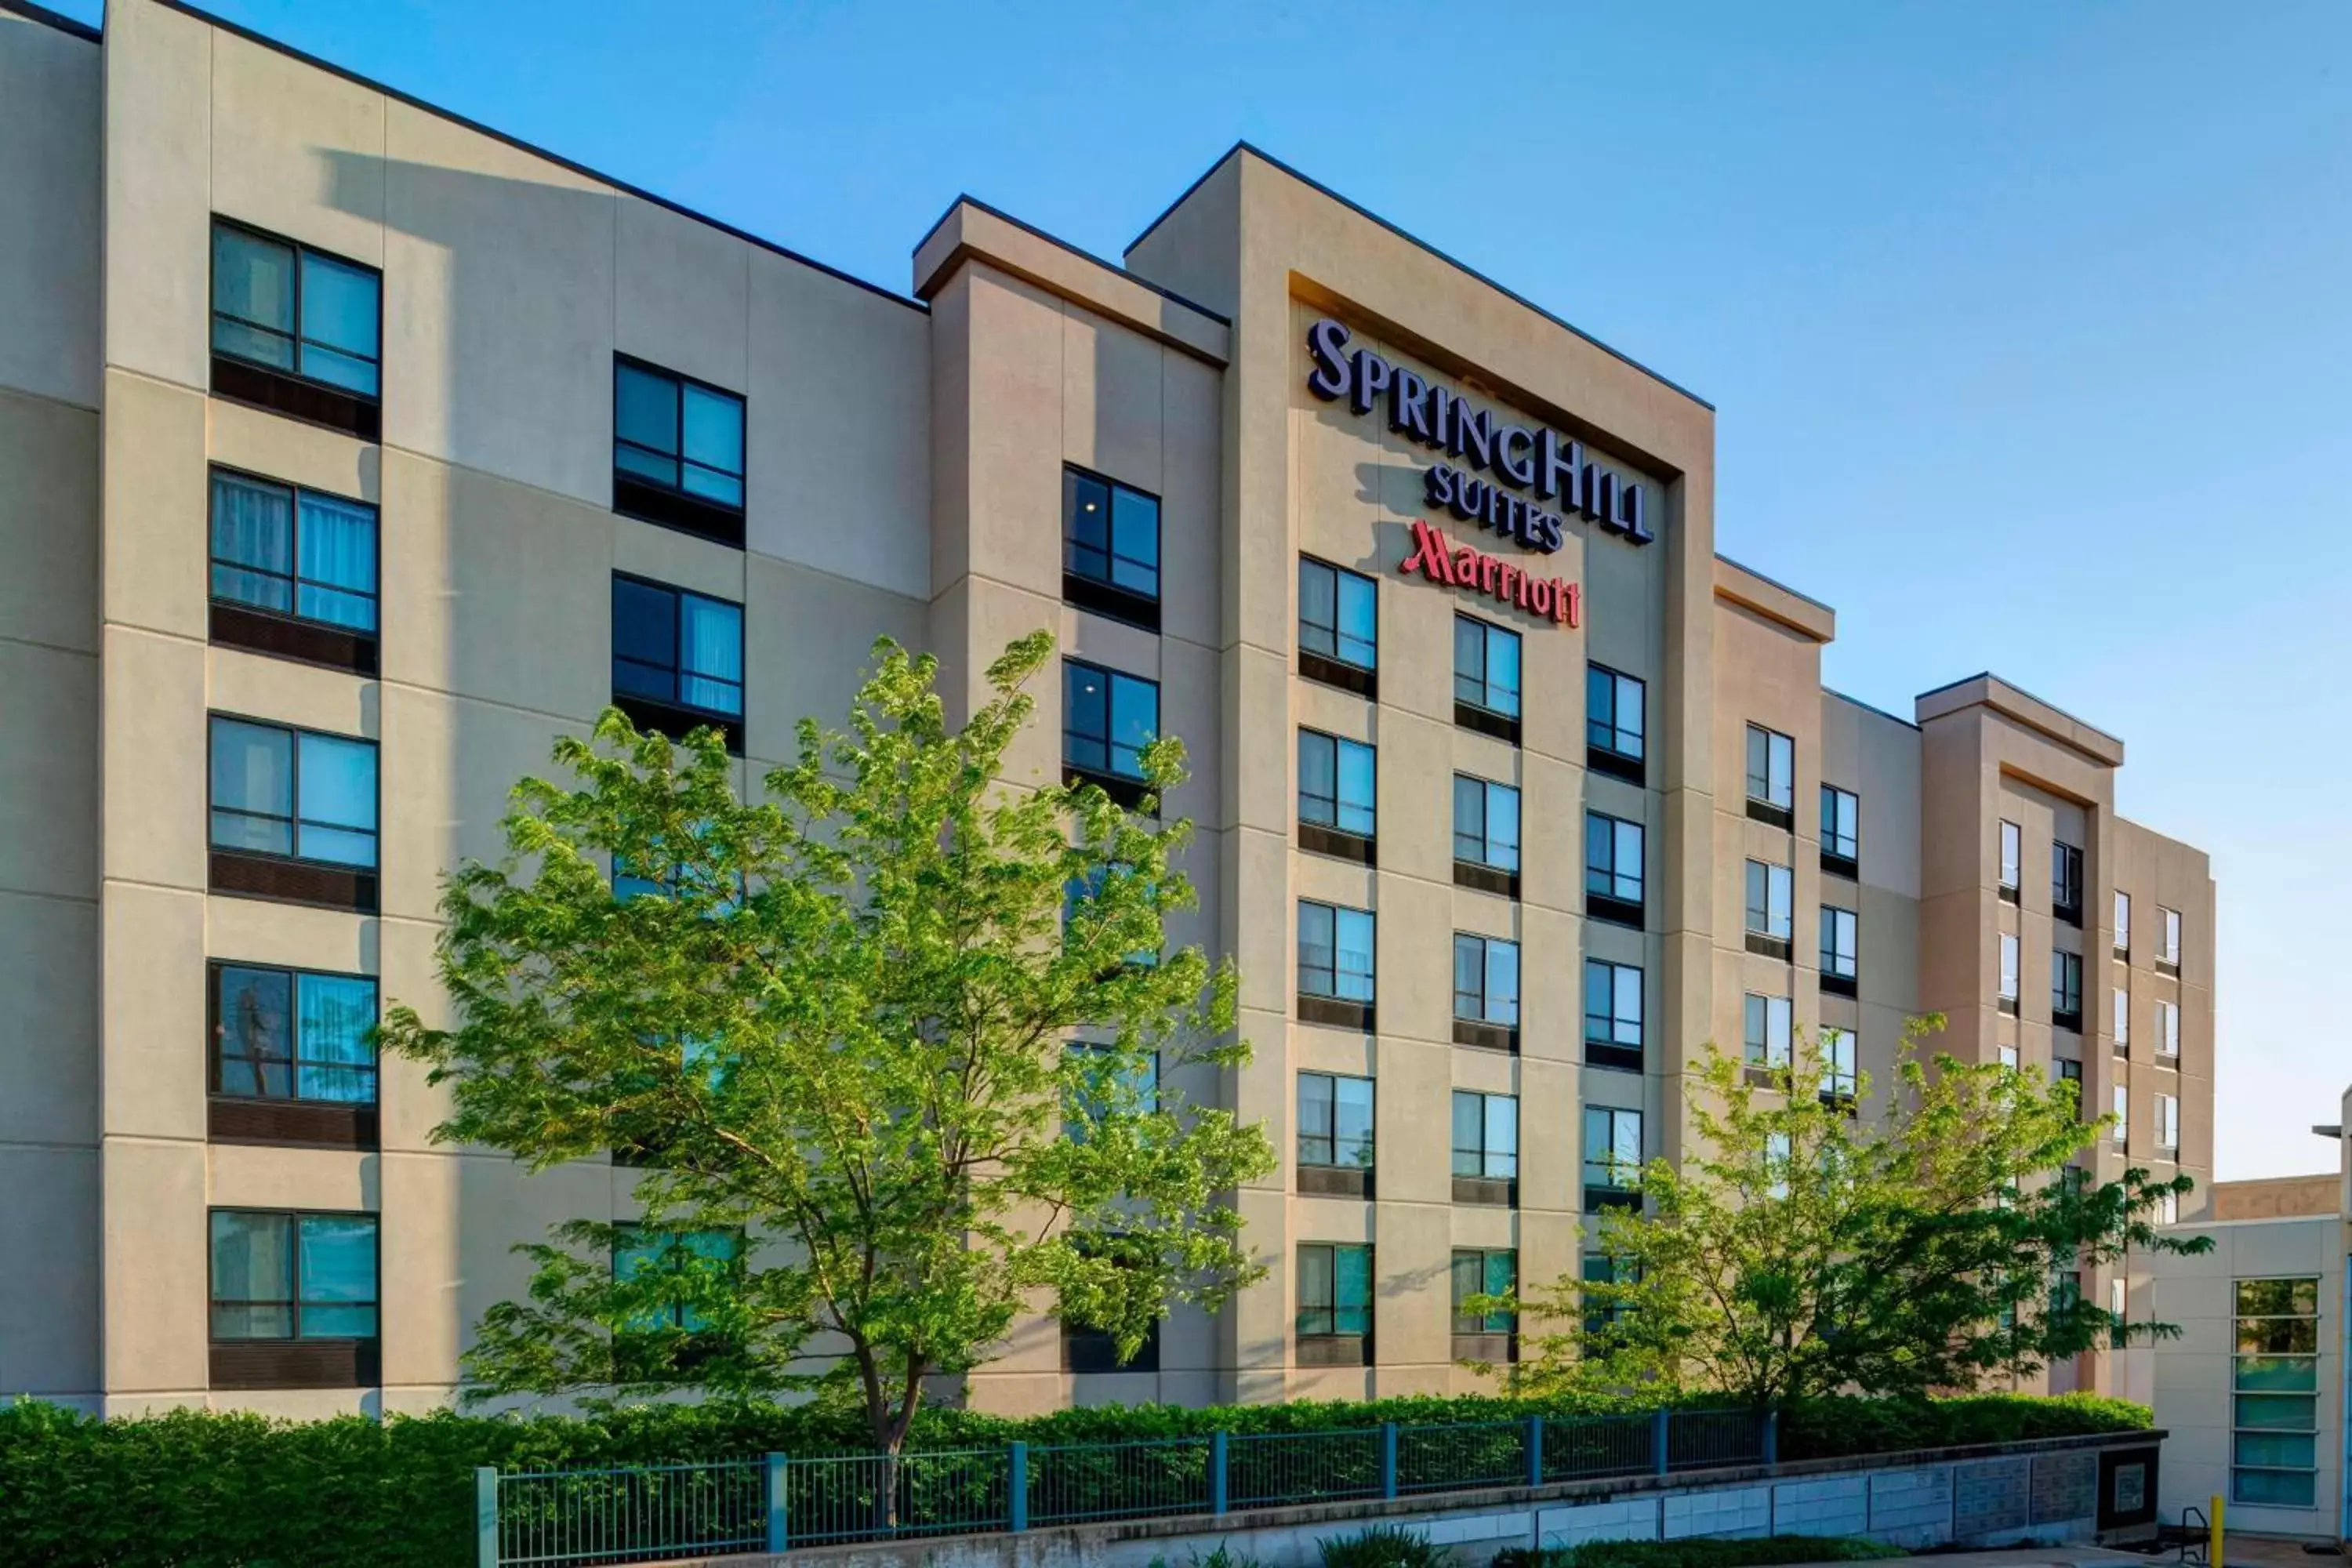 Property Building in SpringHill Suites St. Louis Brentwood